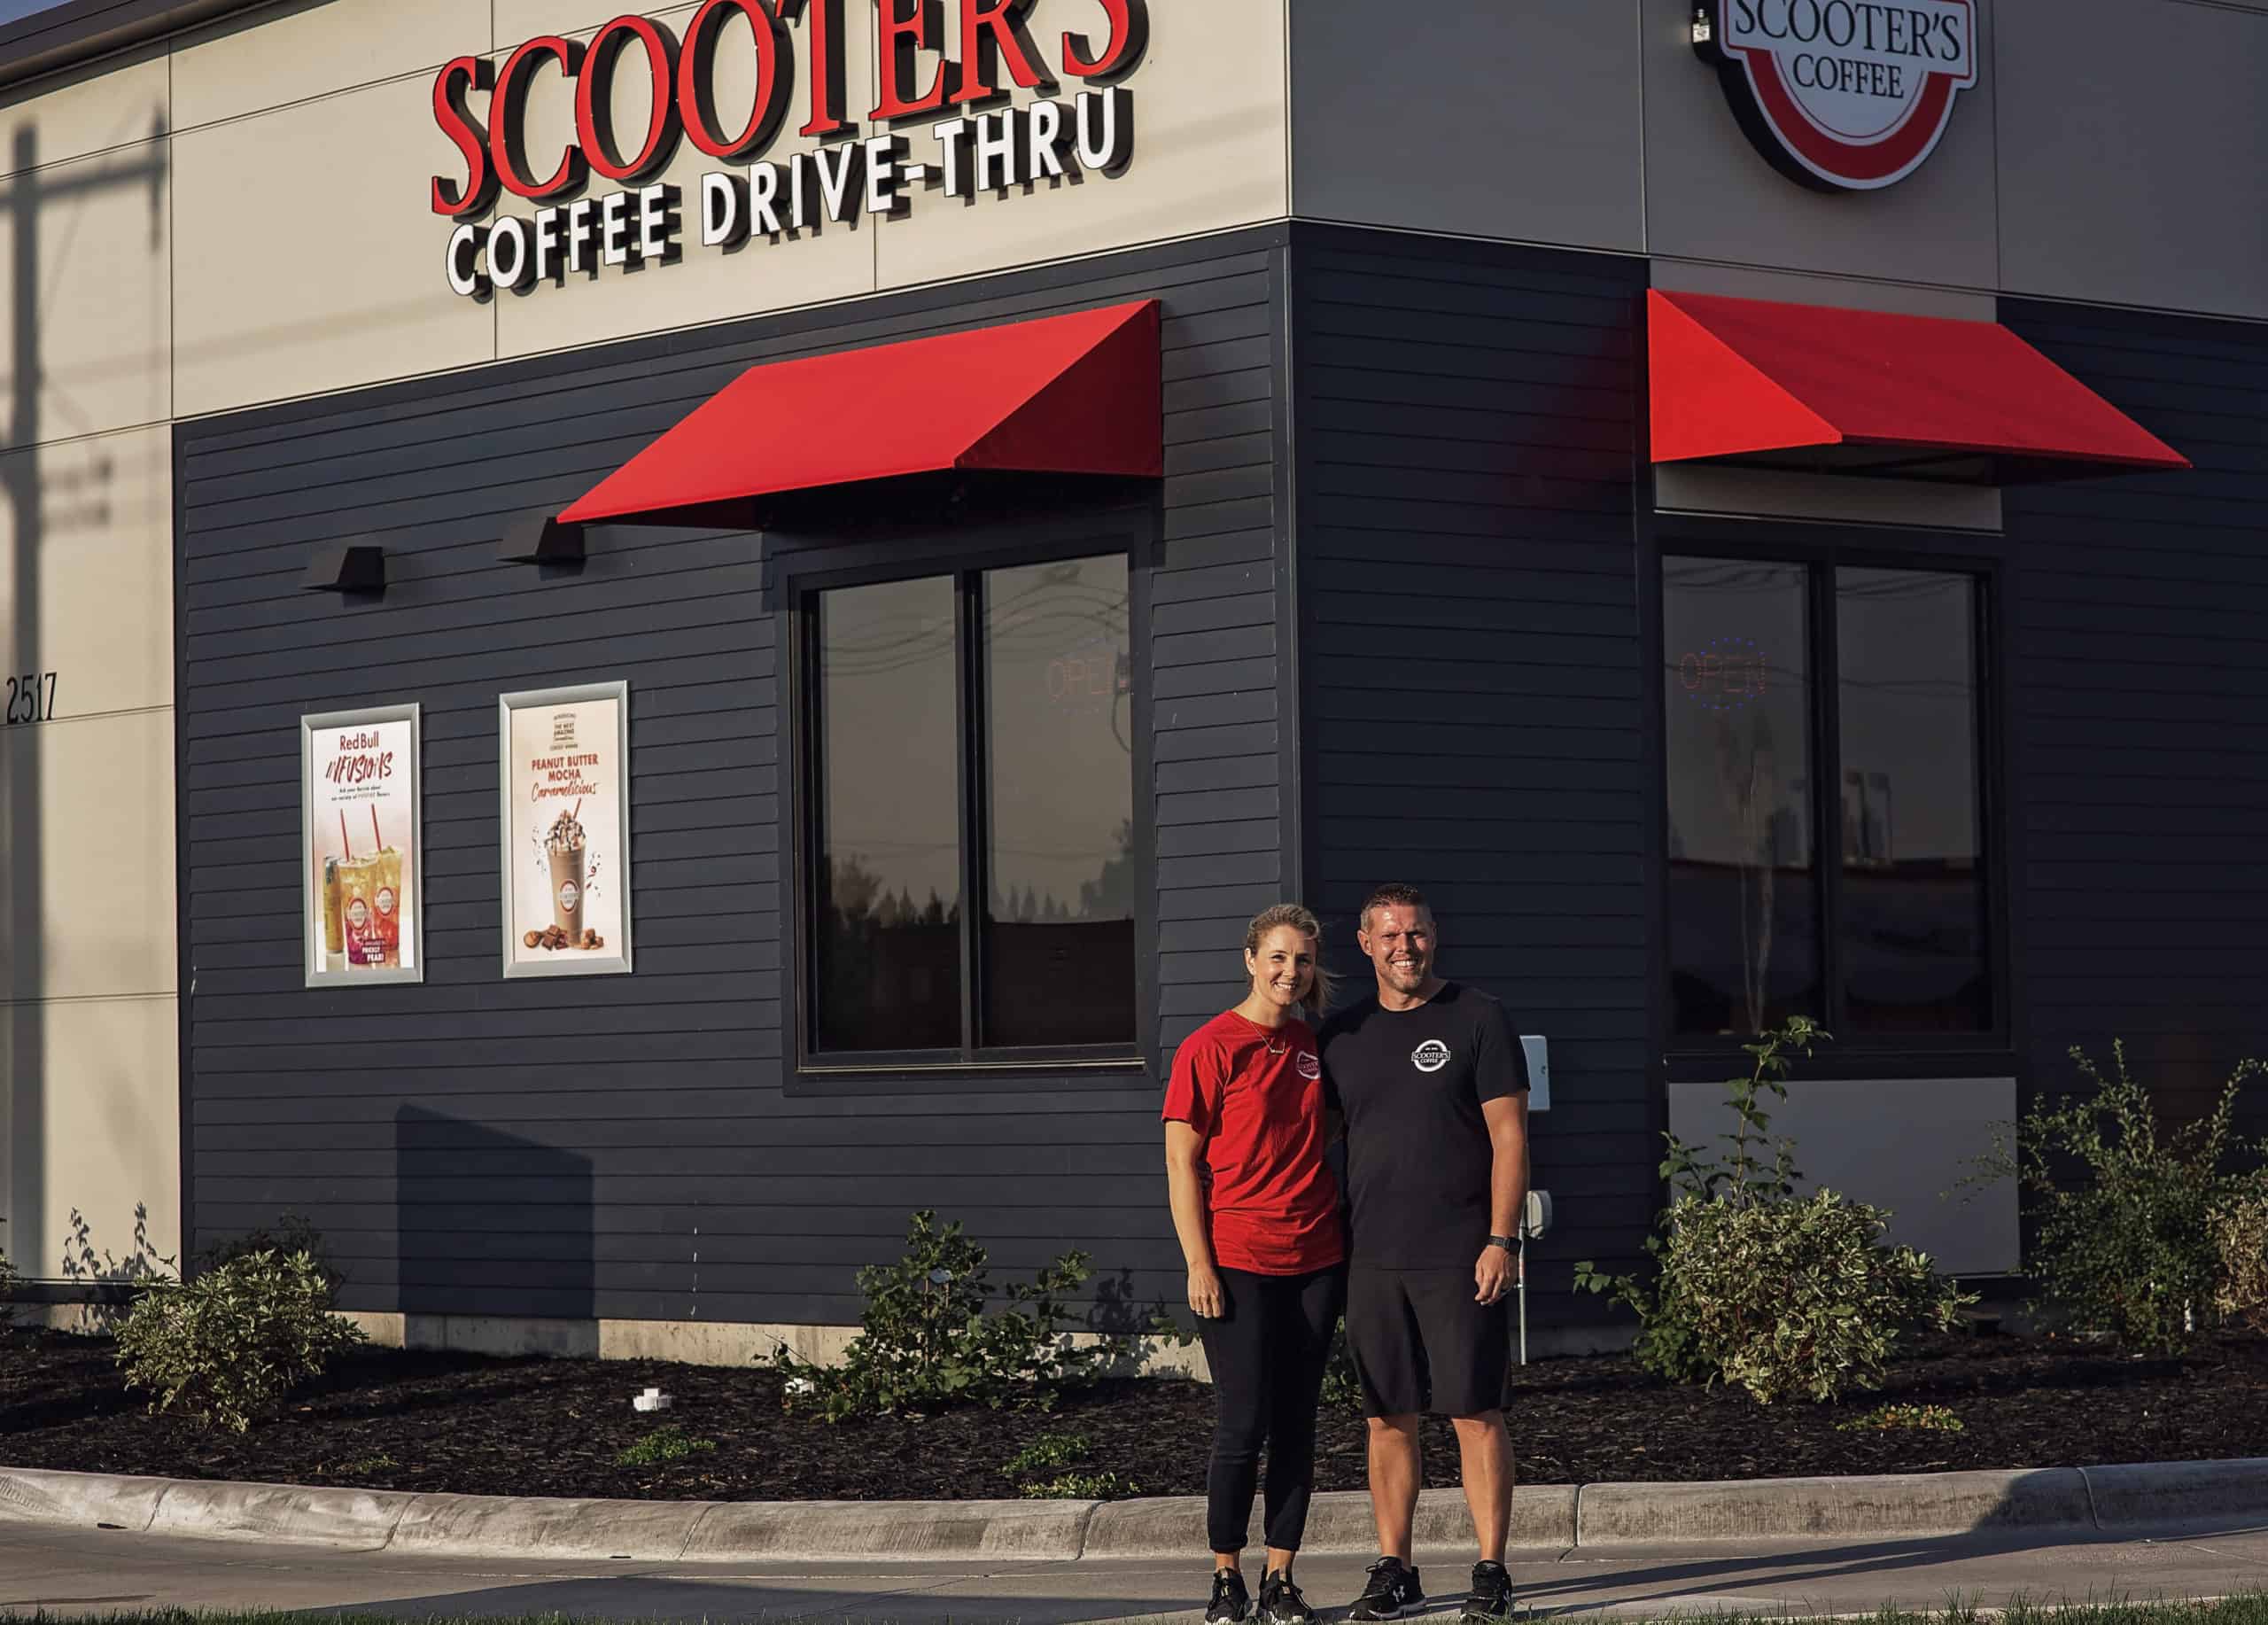 Two Scooter's Coffee franchisees standing in front of their drive-thru coffee franchise.